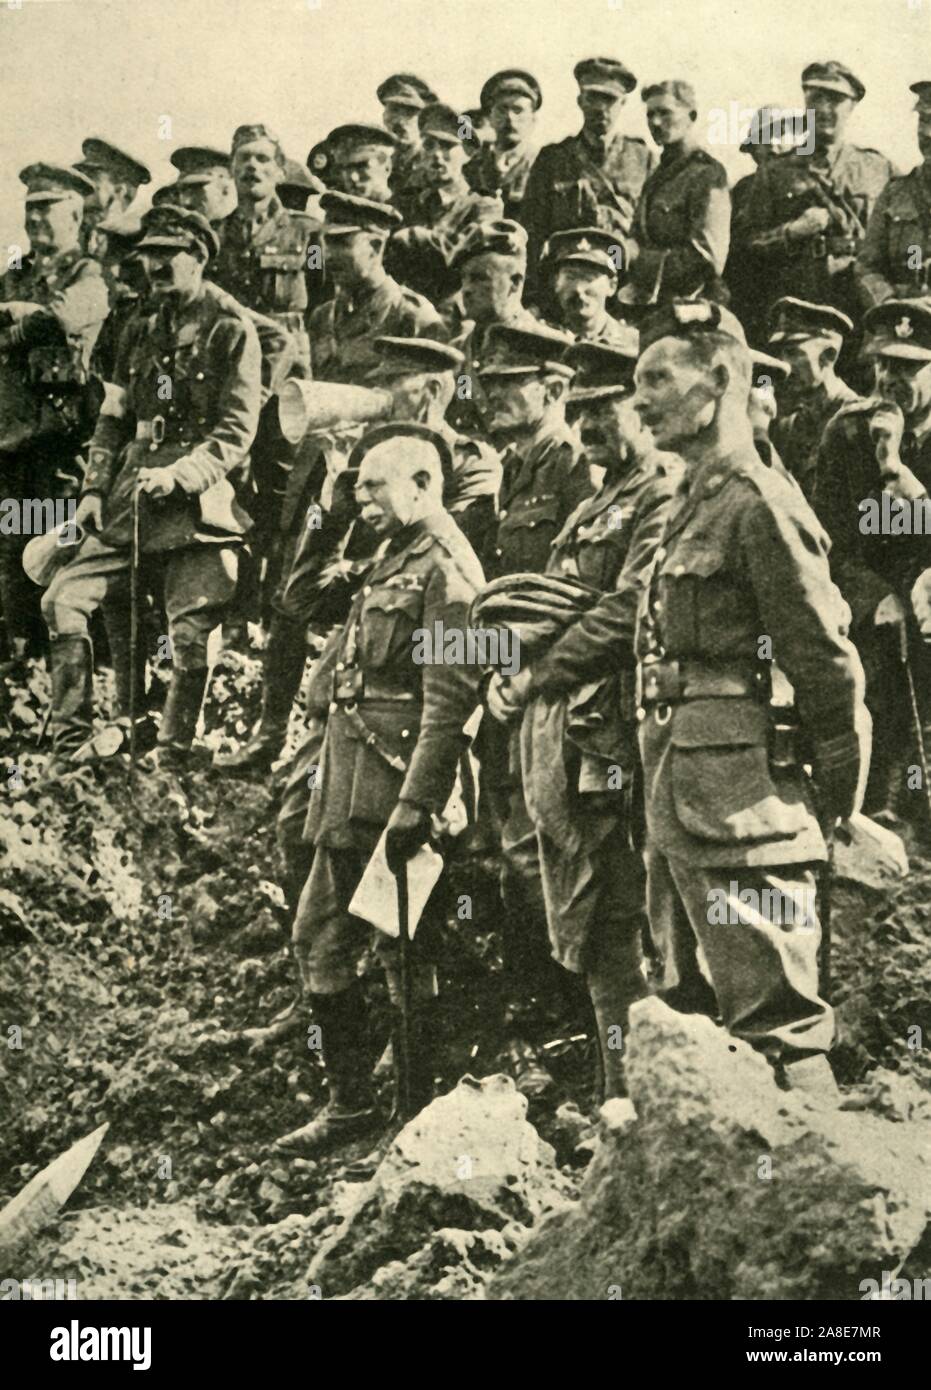 'General Sir Herbert Plumer inspecting the effects of a mine explosion', First World War, c1917, (c1920). 'The Second Army's Chief on the Flanders Front'. Herbert Plumer (centre), and fellow British officers on the battlefield, Belgian Western Front. From &quot;The Great World War: A History&quot;, Volume VII, edited by Frank A Mumby. [The Gresham Publishing Company Ltd, London, c1920] Stock Photo